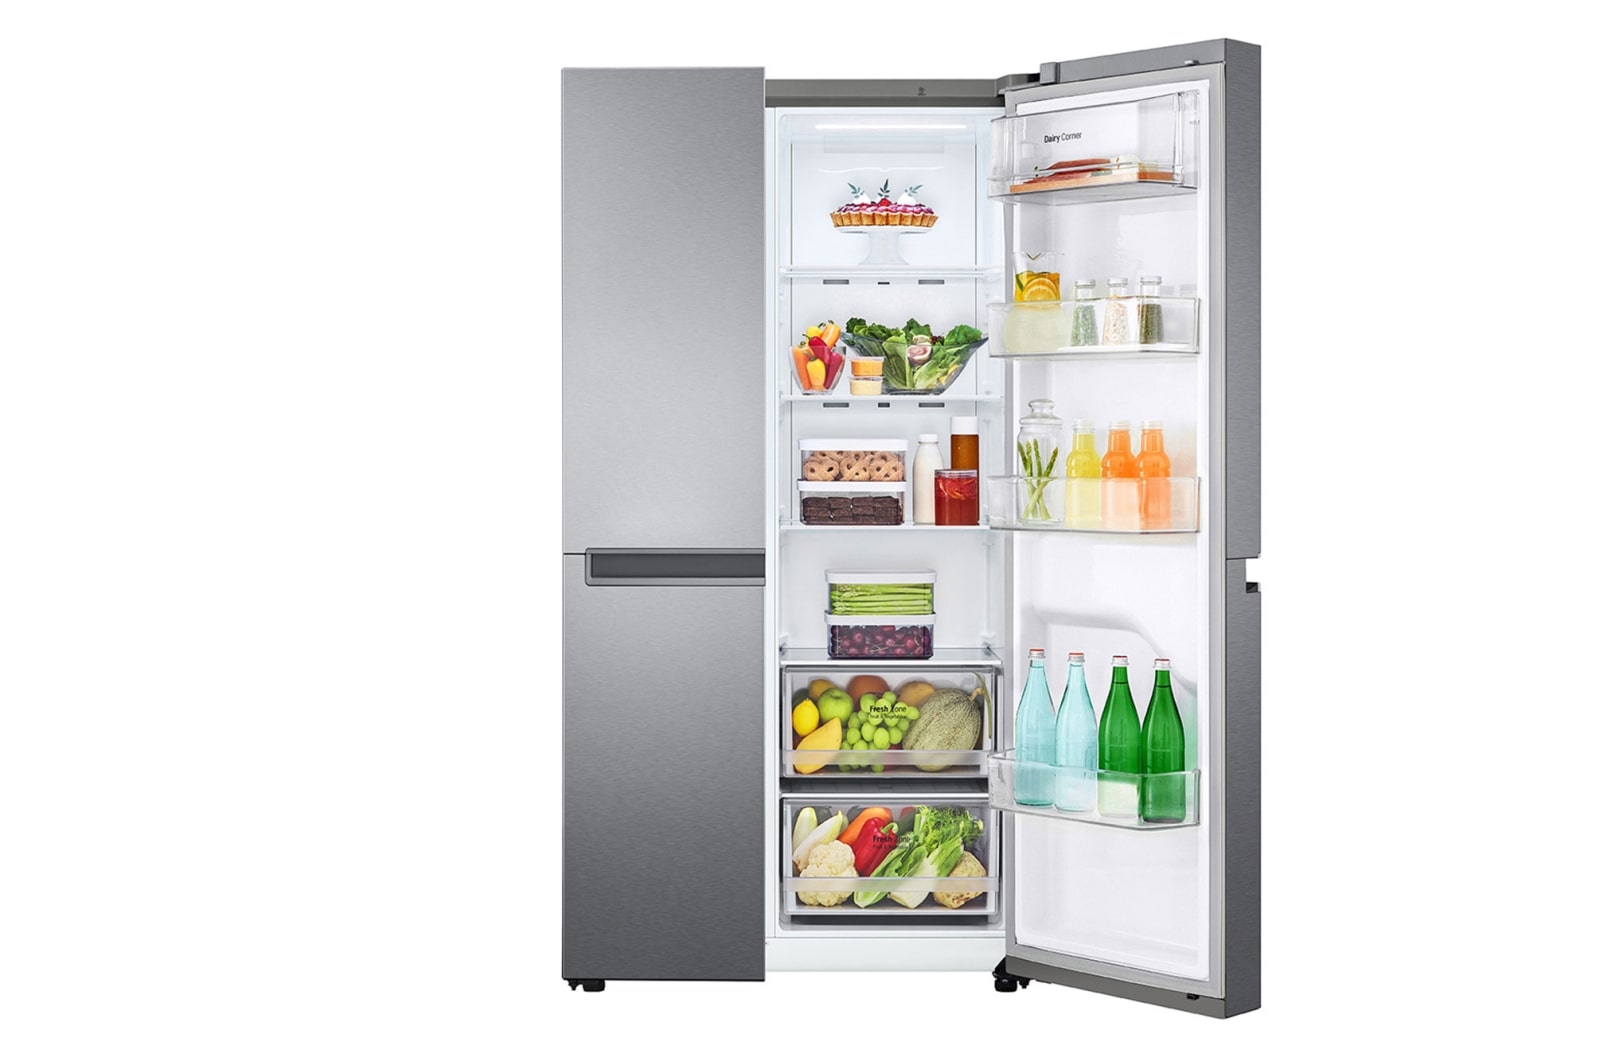 LG 643 Liters Refrigerator With LinearCooling™ Technology - Silver